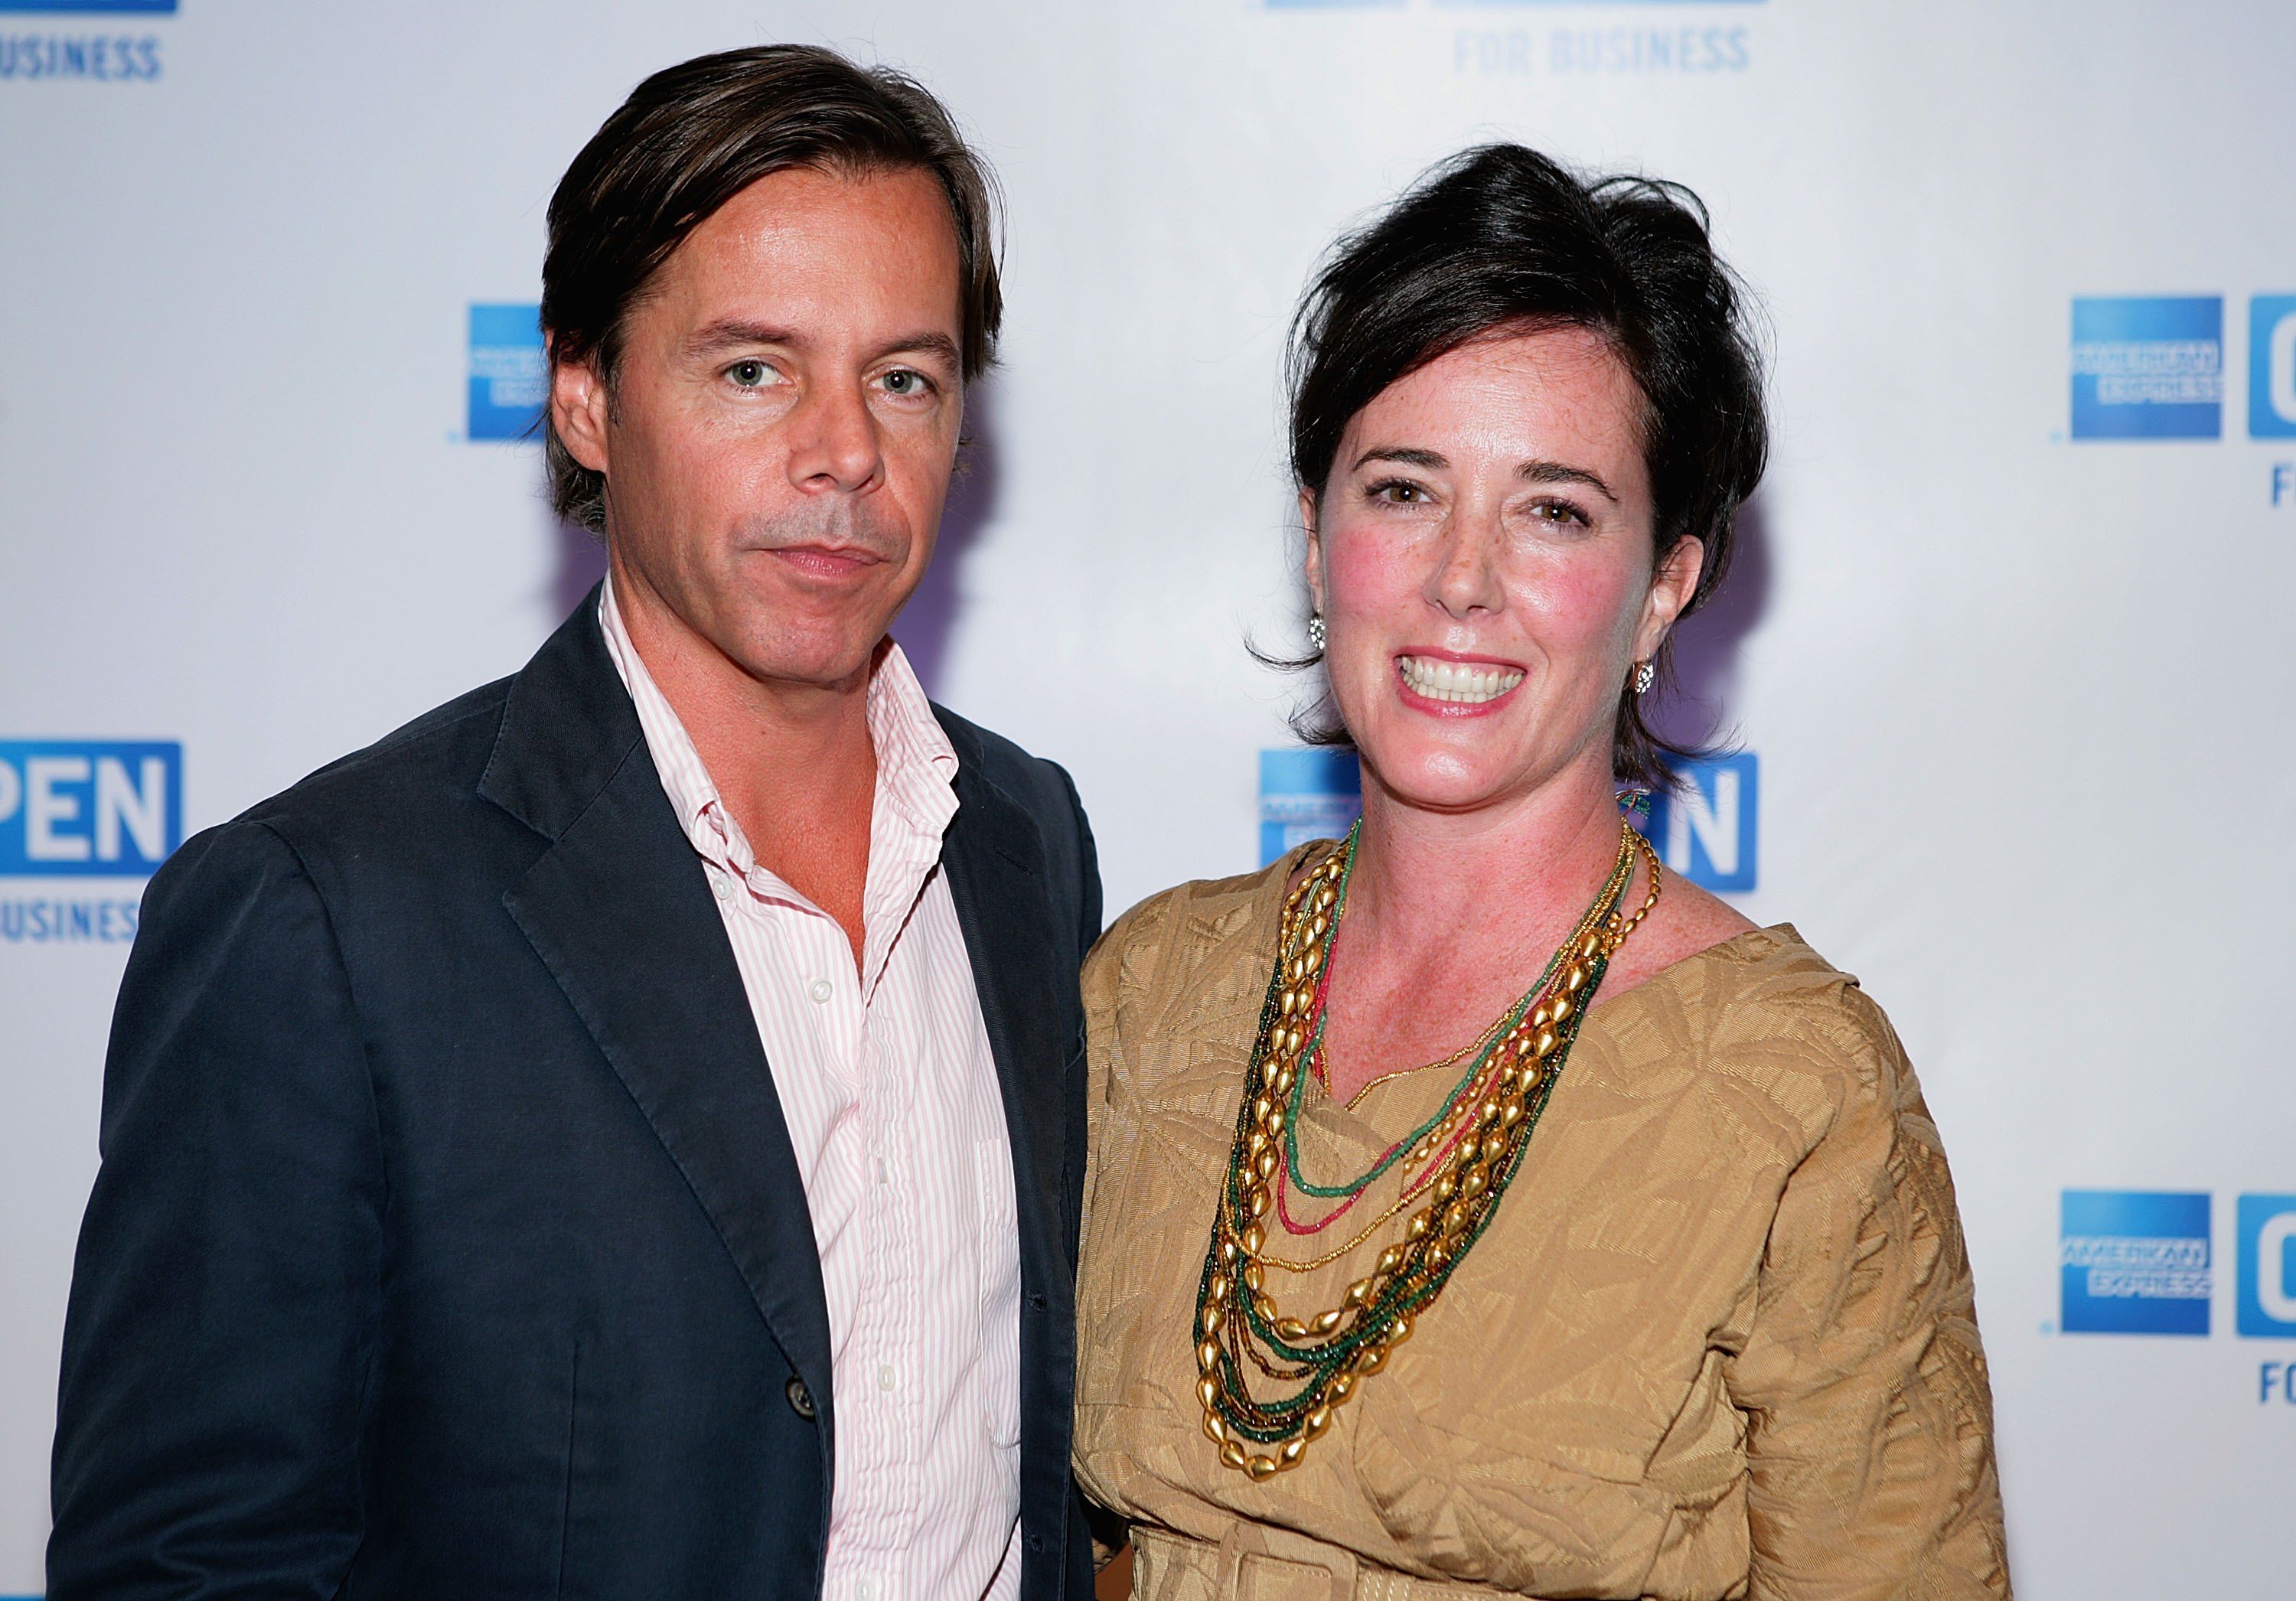 Kate Spade's Family Release Statement — Kate Spade Suicide Family Reactions